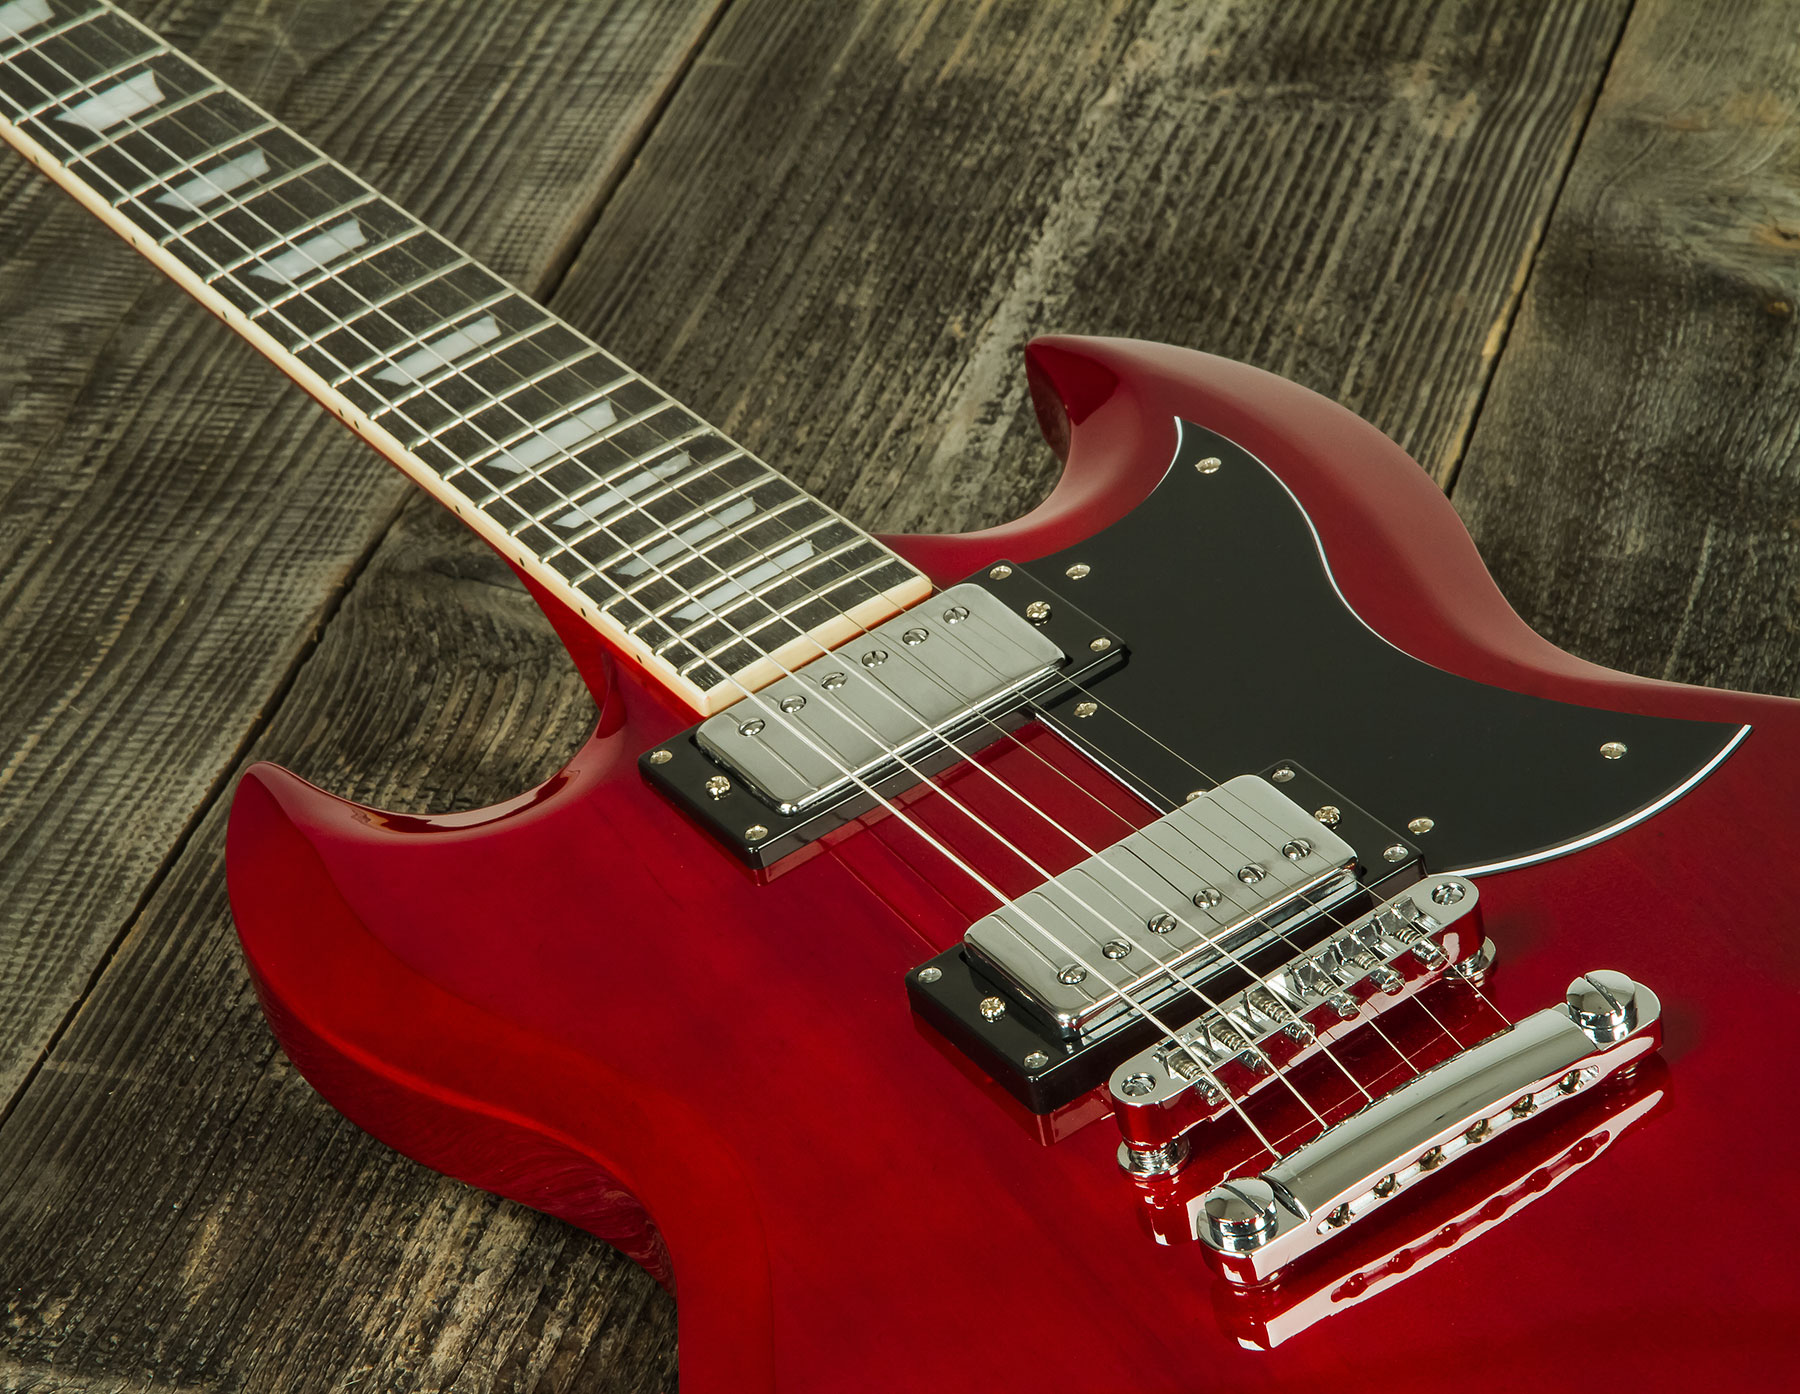 Eastone Sdc70 Hh Ht Pur - Red - Double cut electric guitar - Variation 3